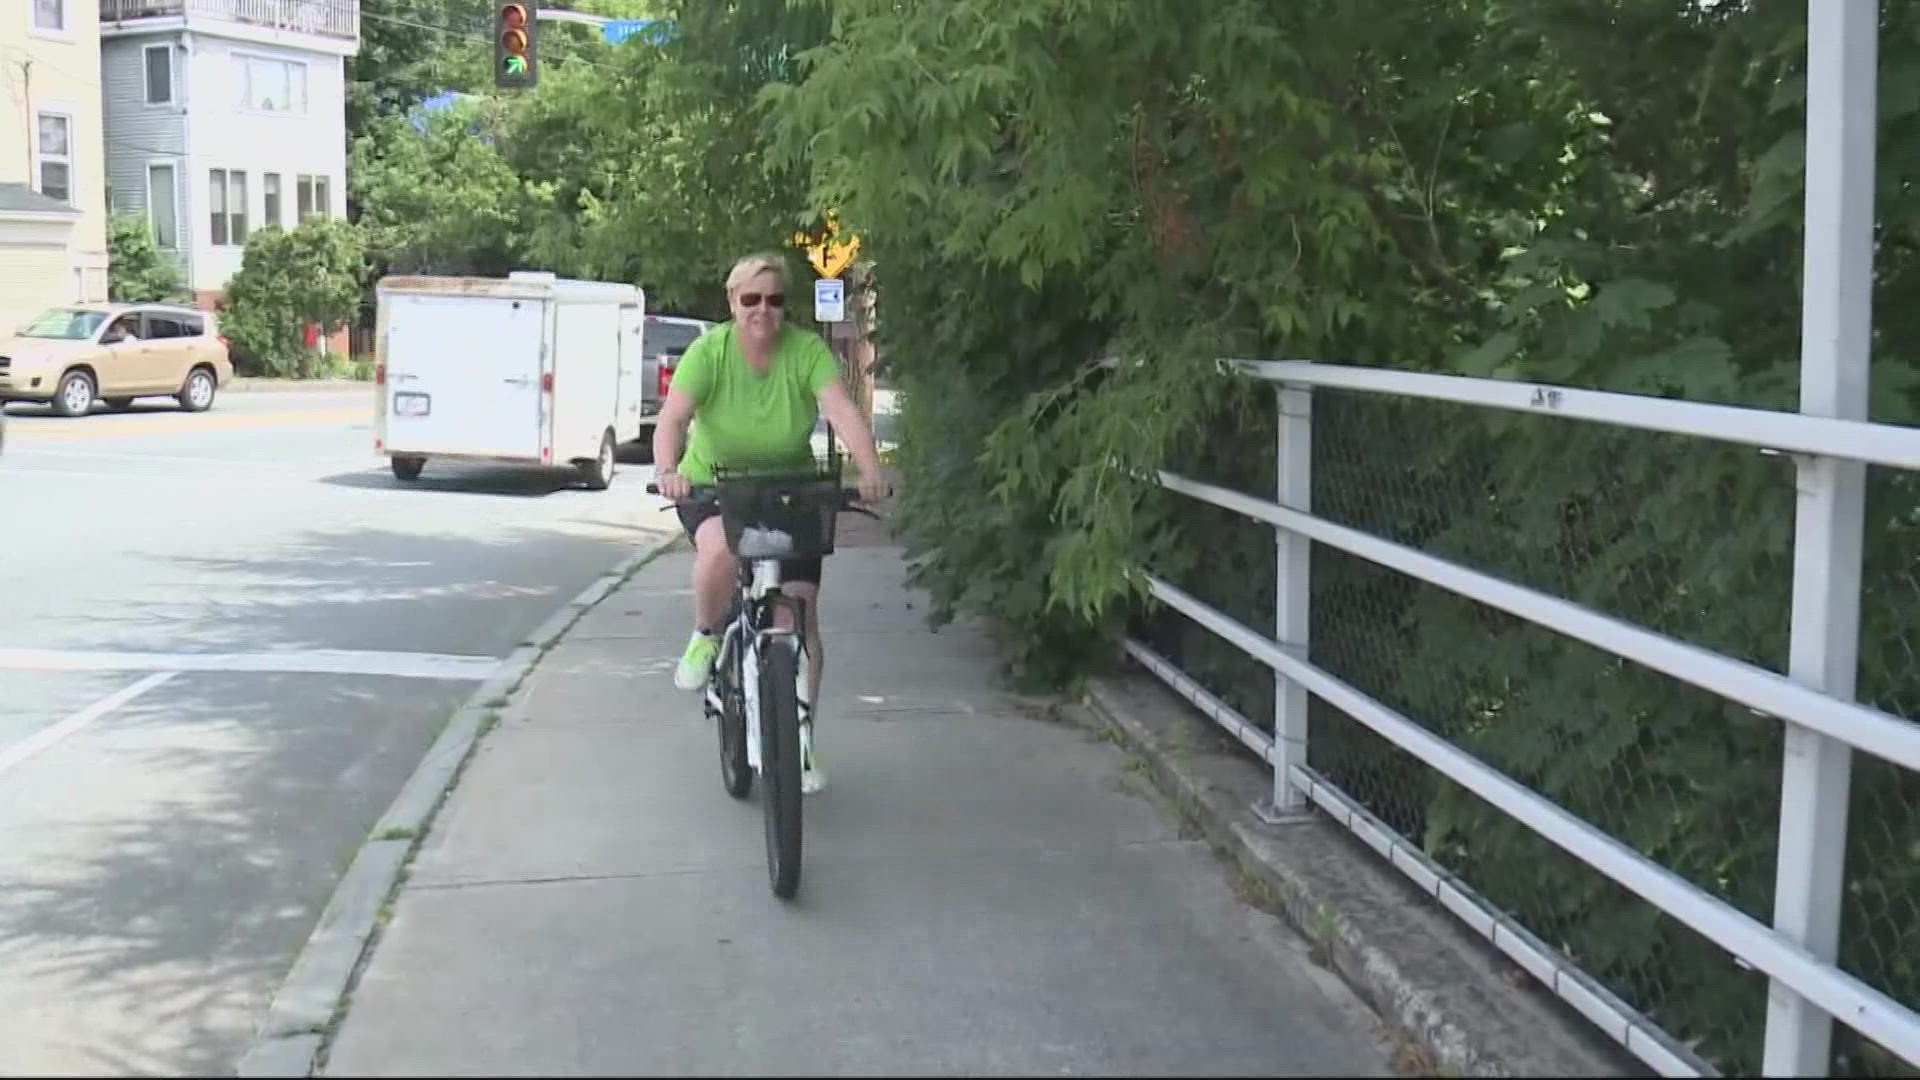 Up to 200 bikes, including 50 electric ones, will hit the streets of Portland starting on Monday.